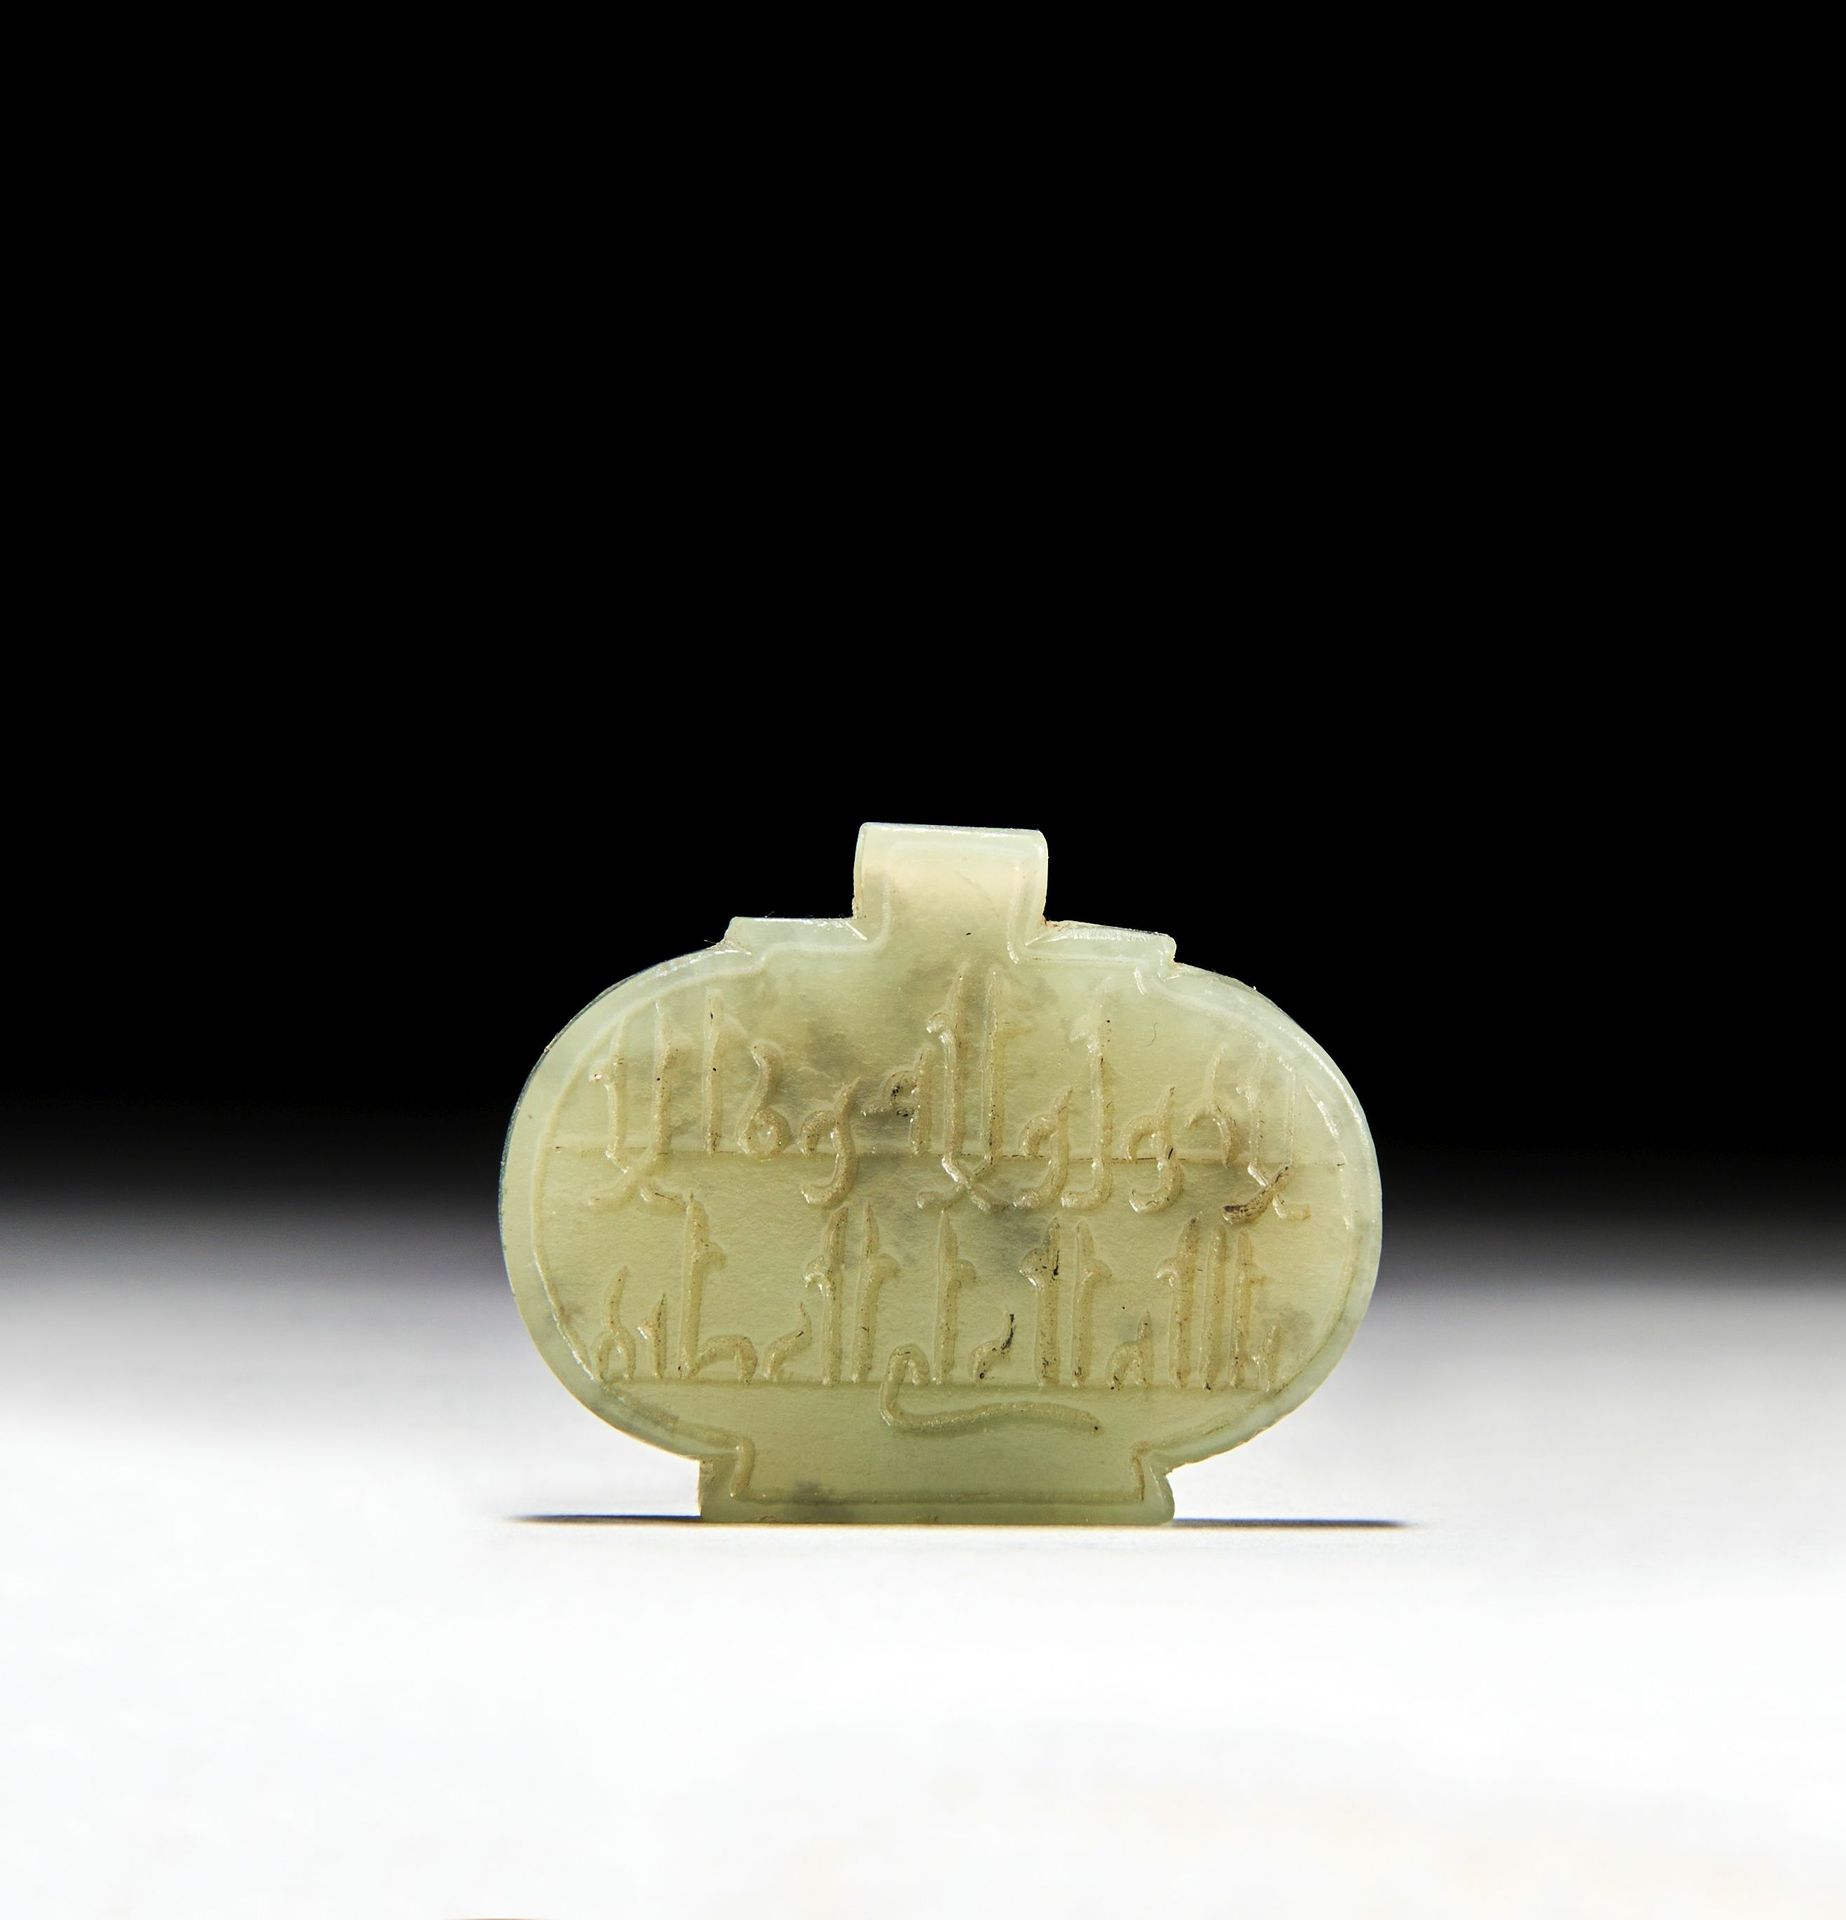 AN ISLAMIC JADE INSCRIBED PENDANT IN KUFIC STYLE TEXT, 19TH CENTURY, PERSIA ANHÄ&hellip;